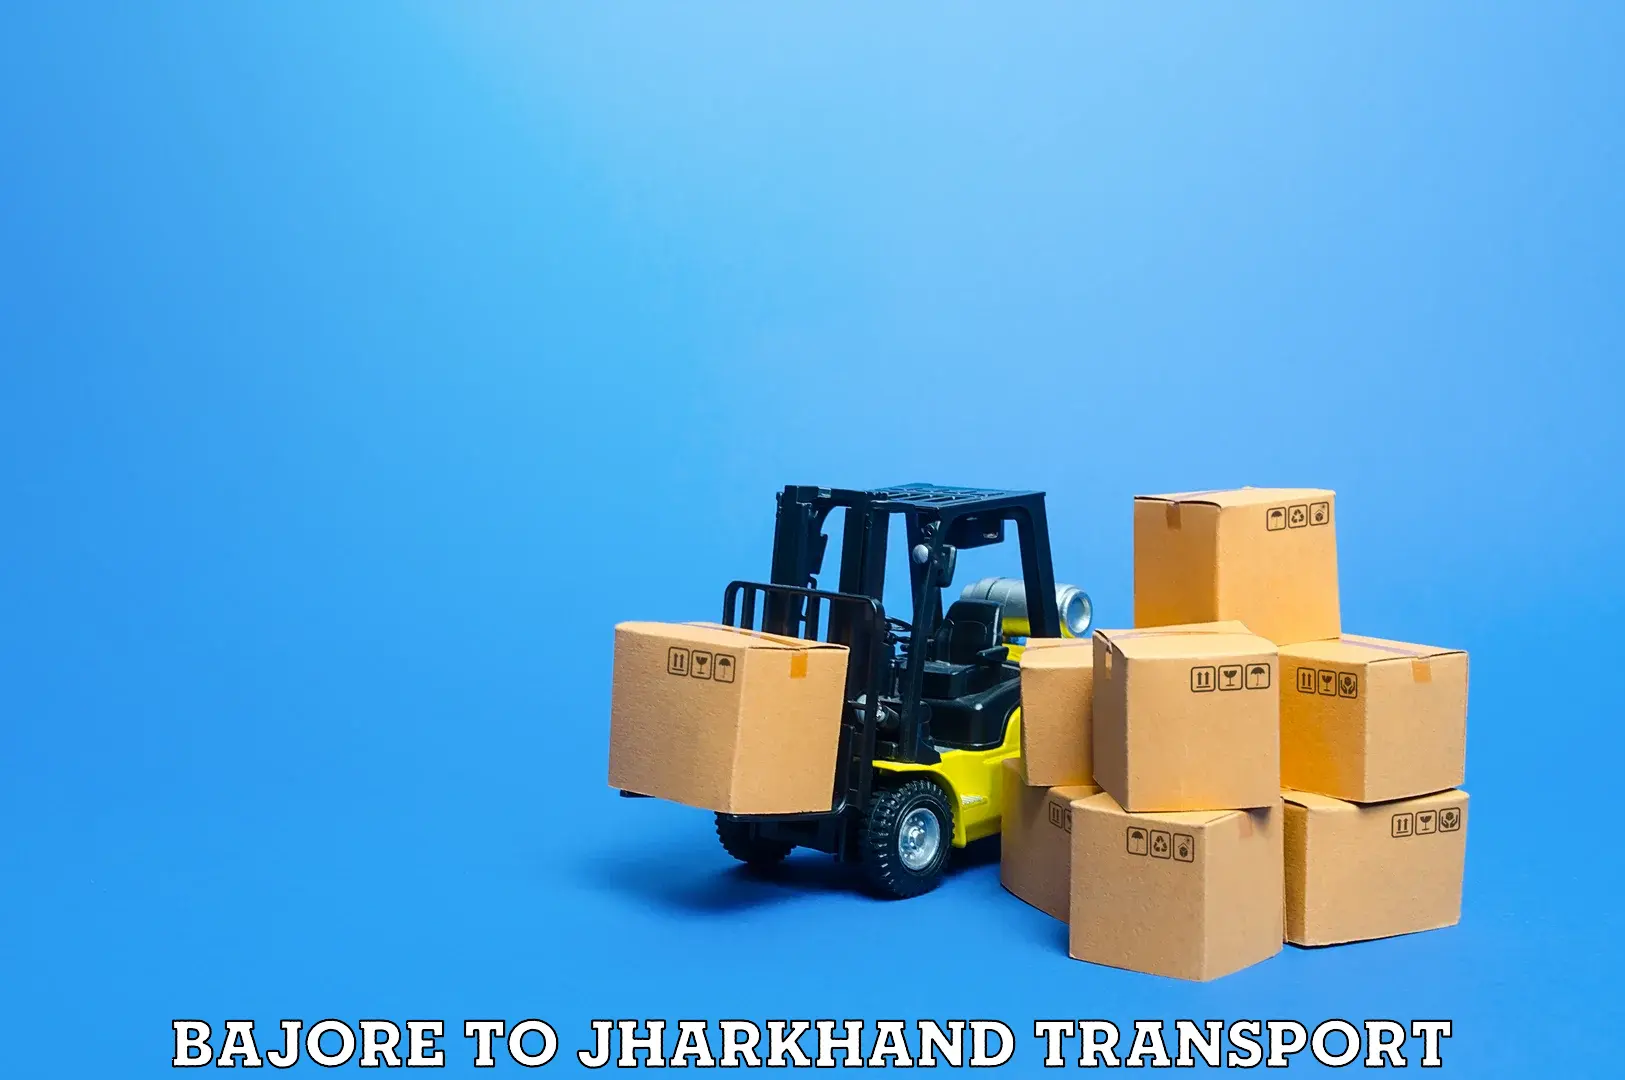 Material transport services Bajore to Jamshedpur